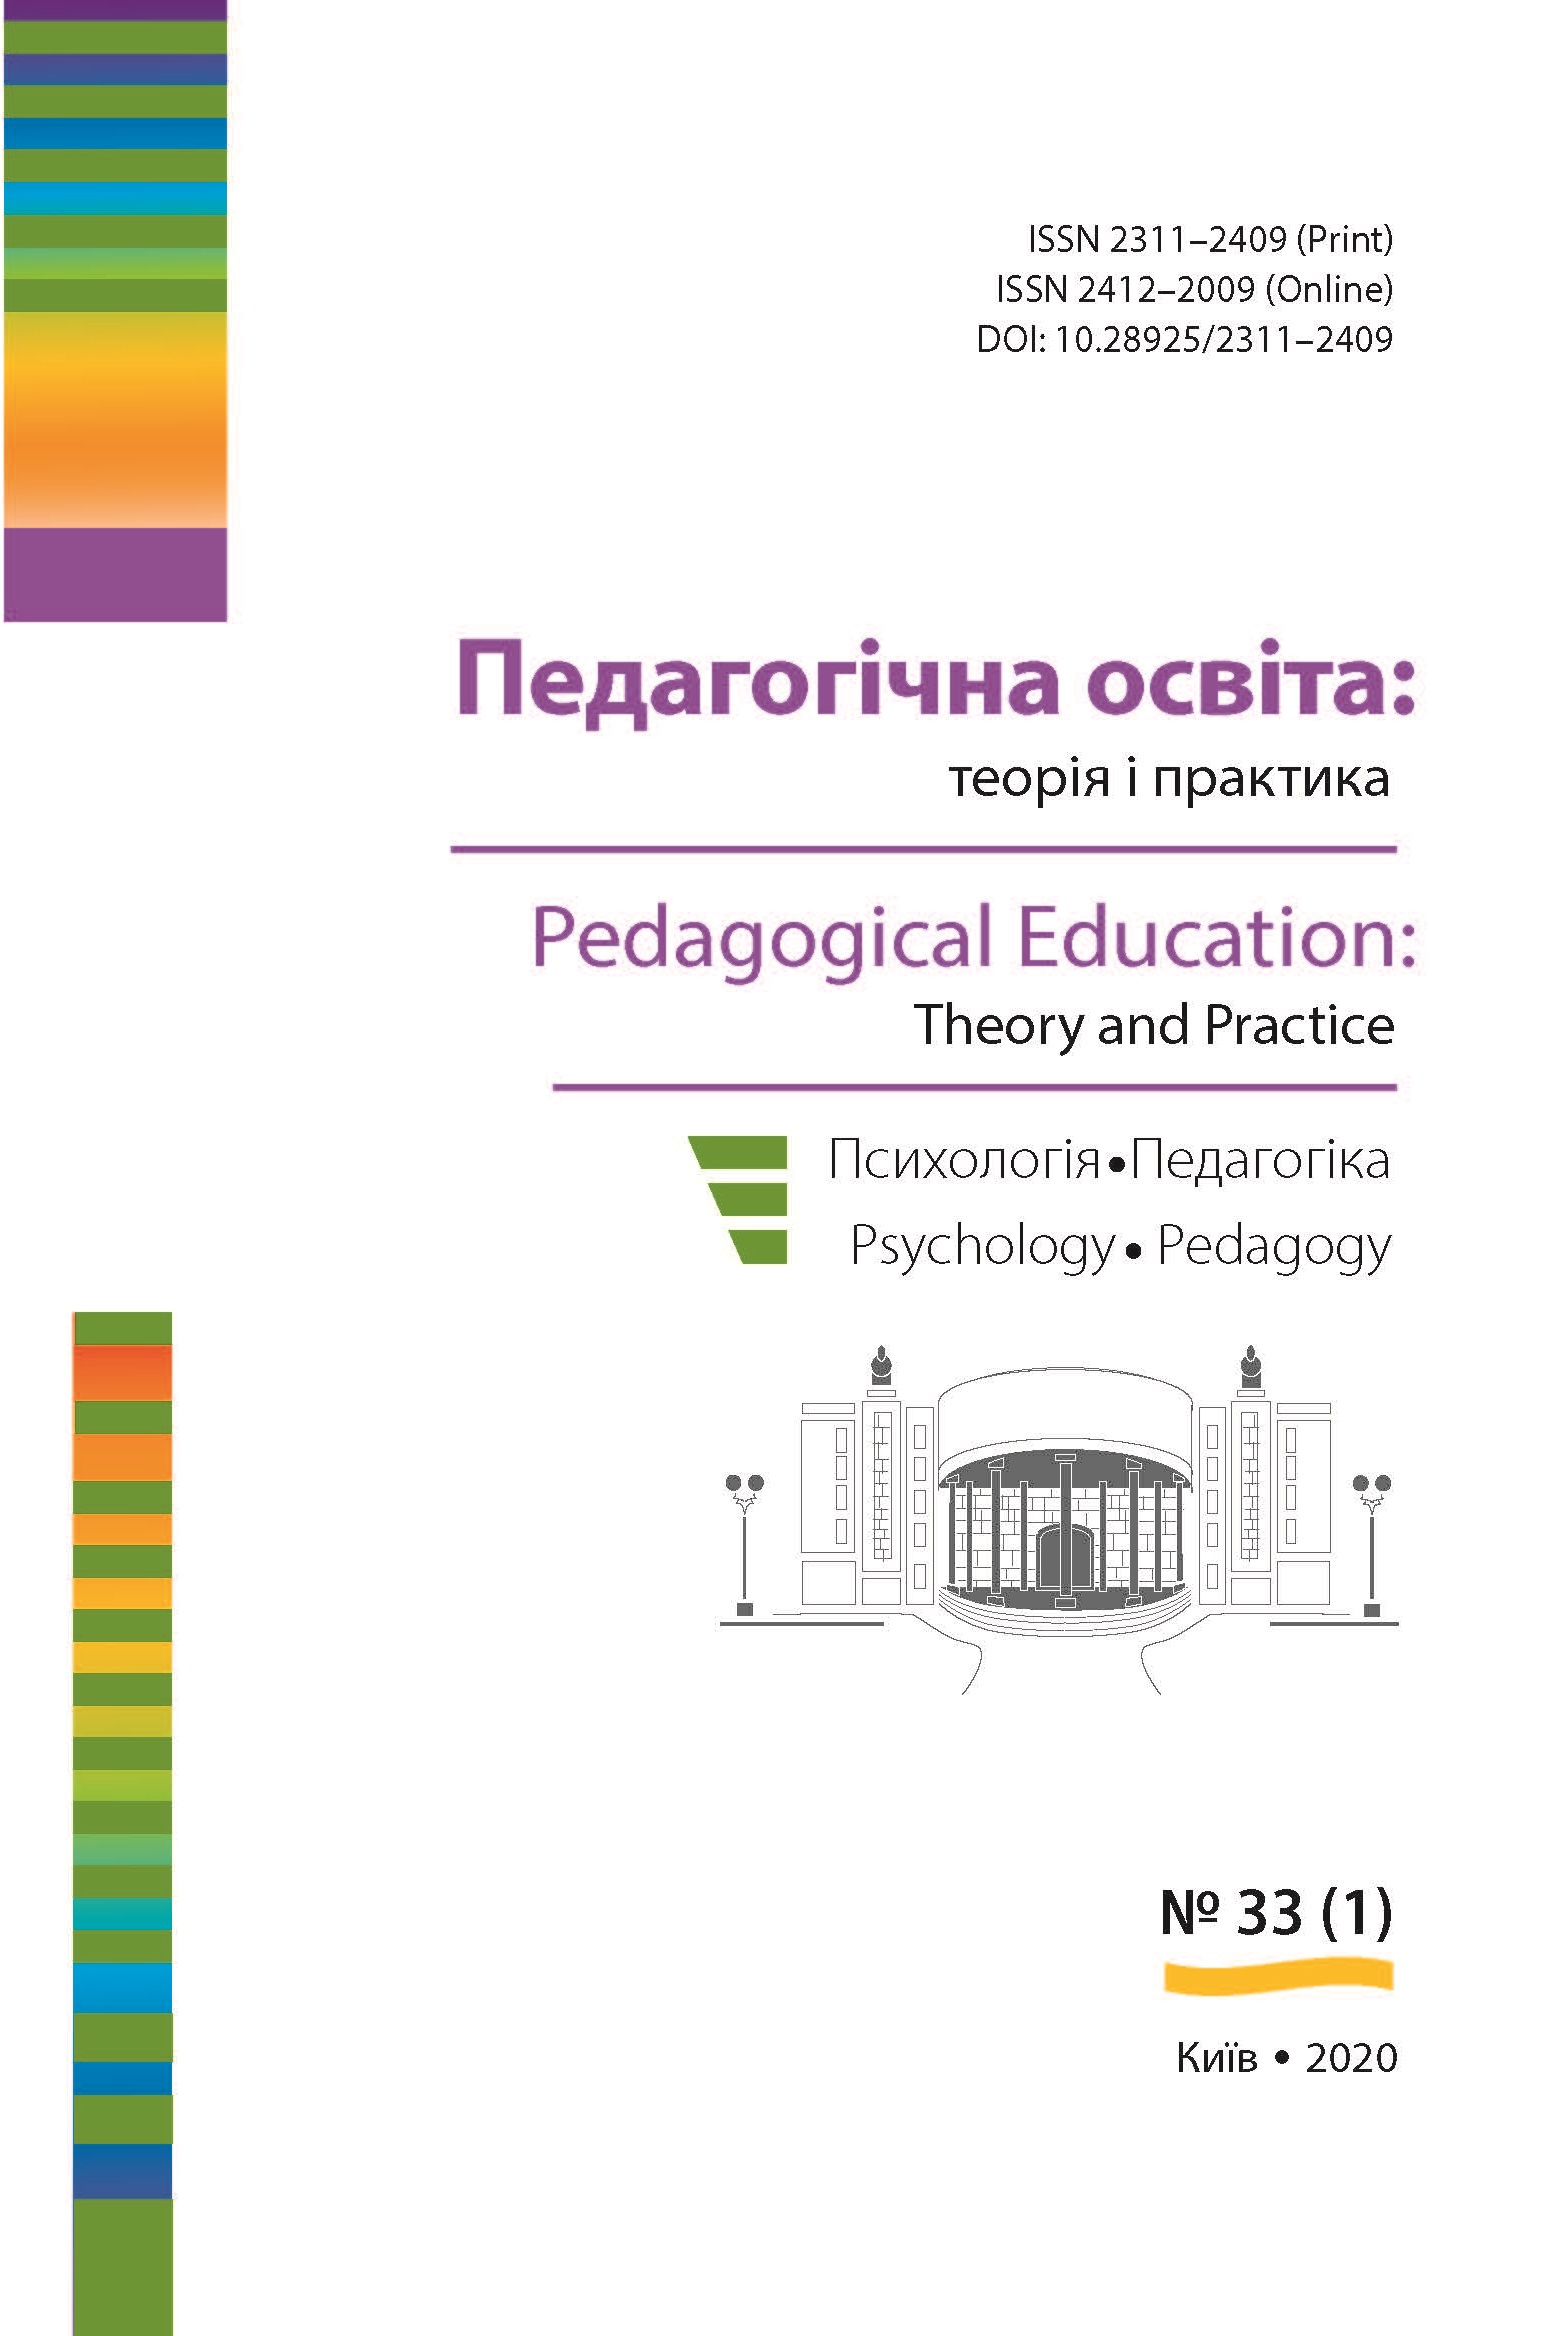 					View No. 33 (2020): Pedagogical Education: Theory and Practice №33
				